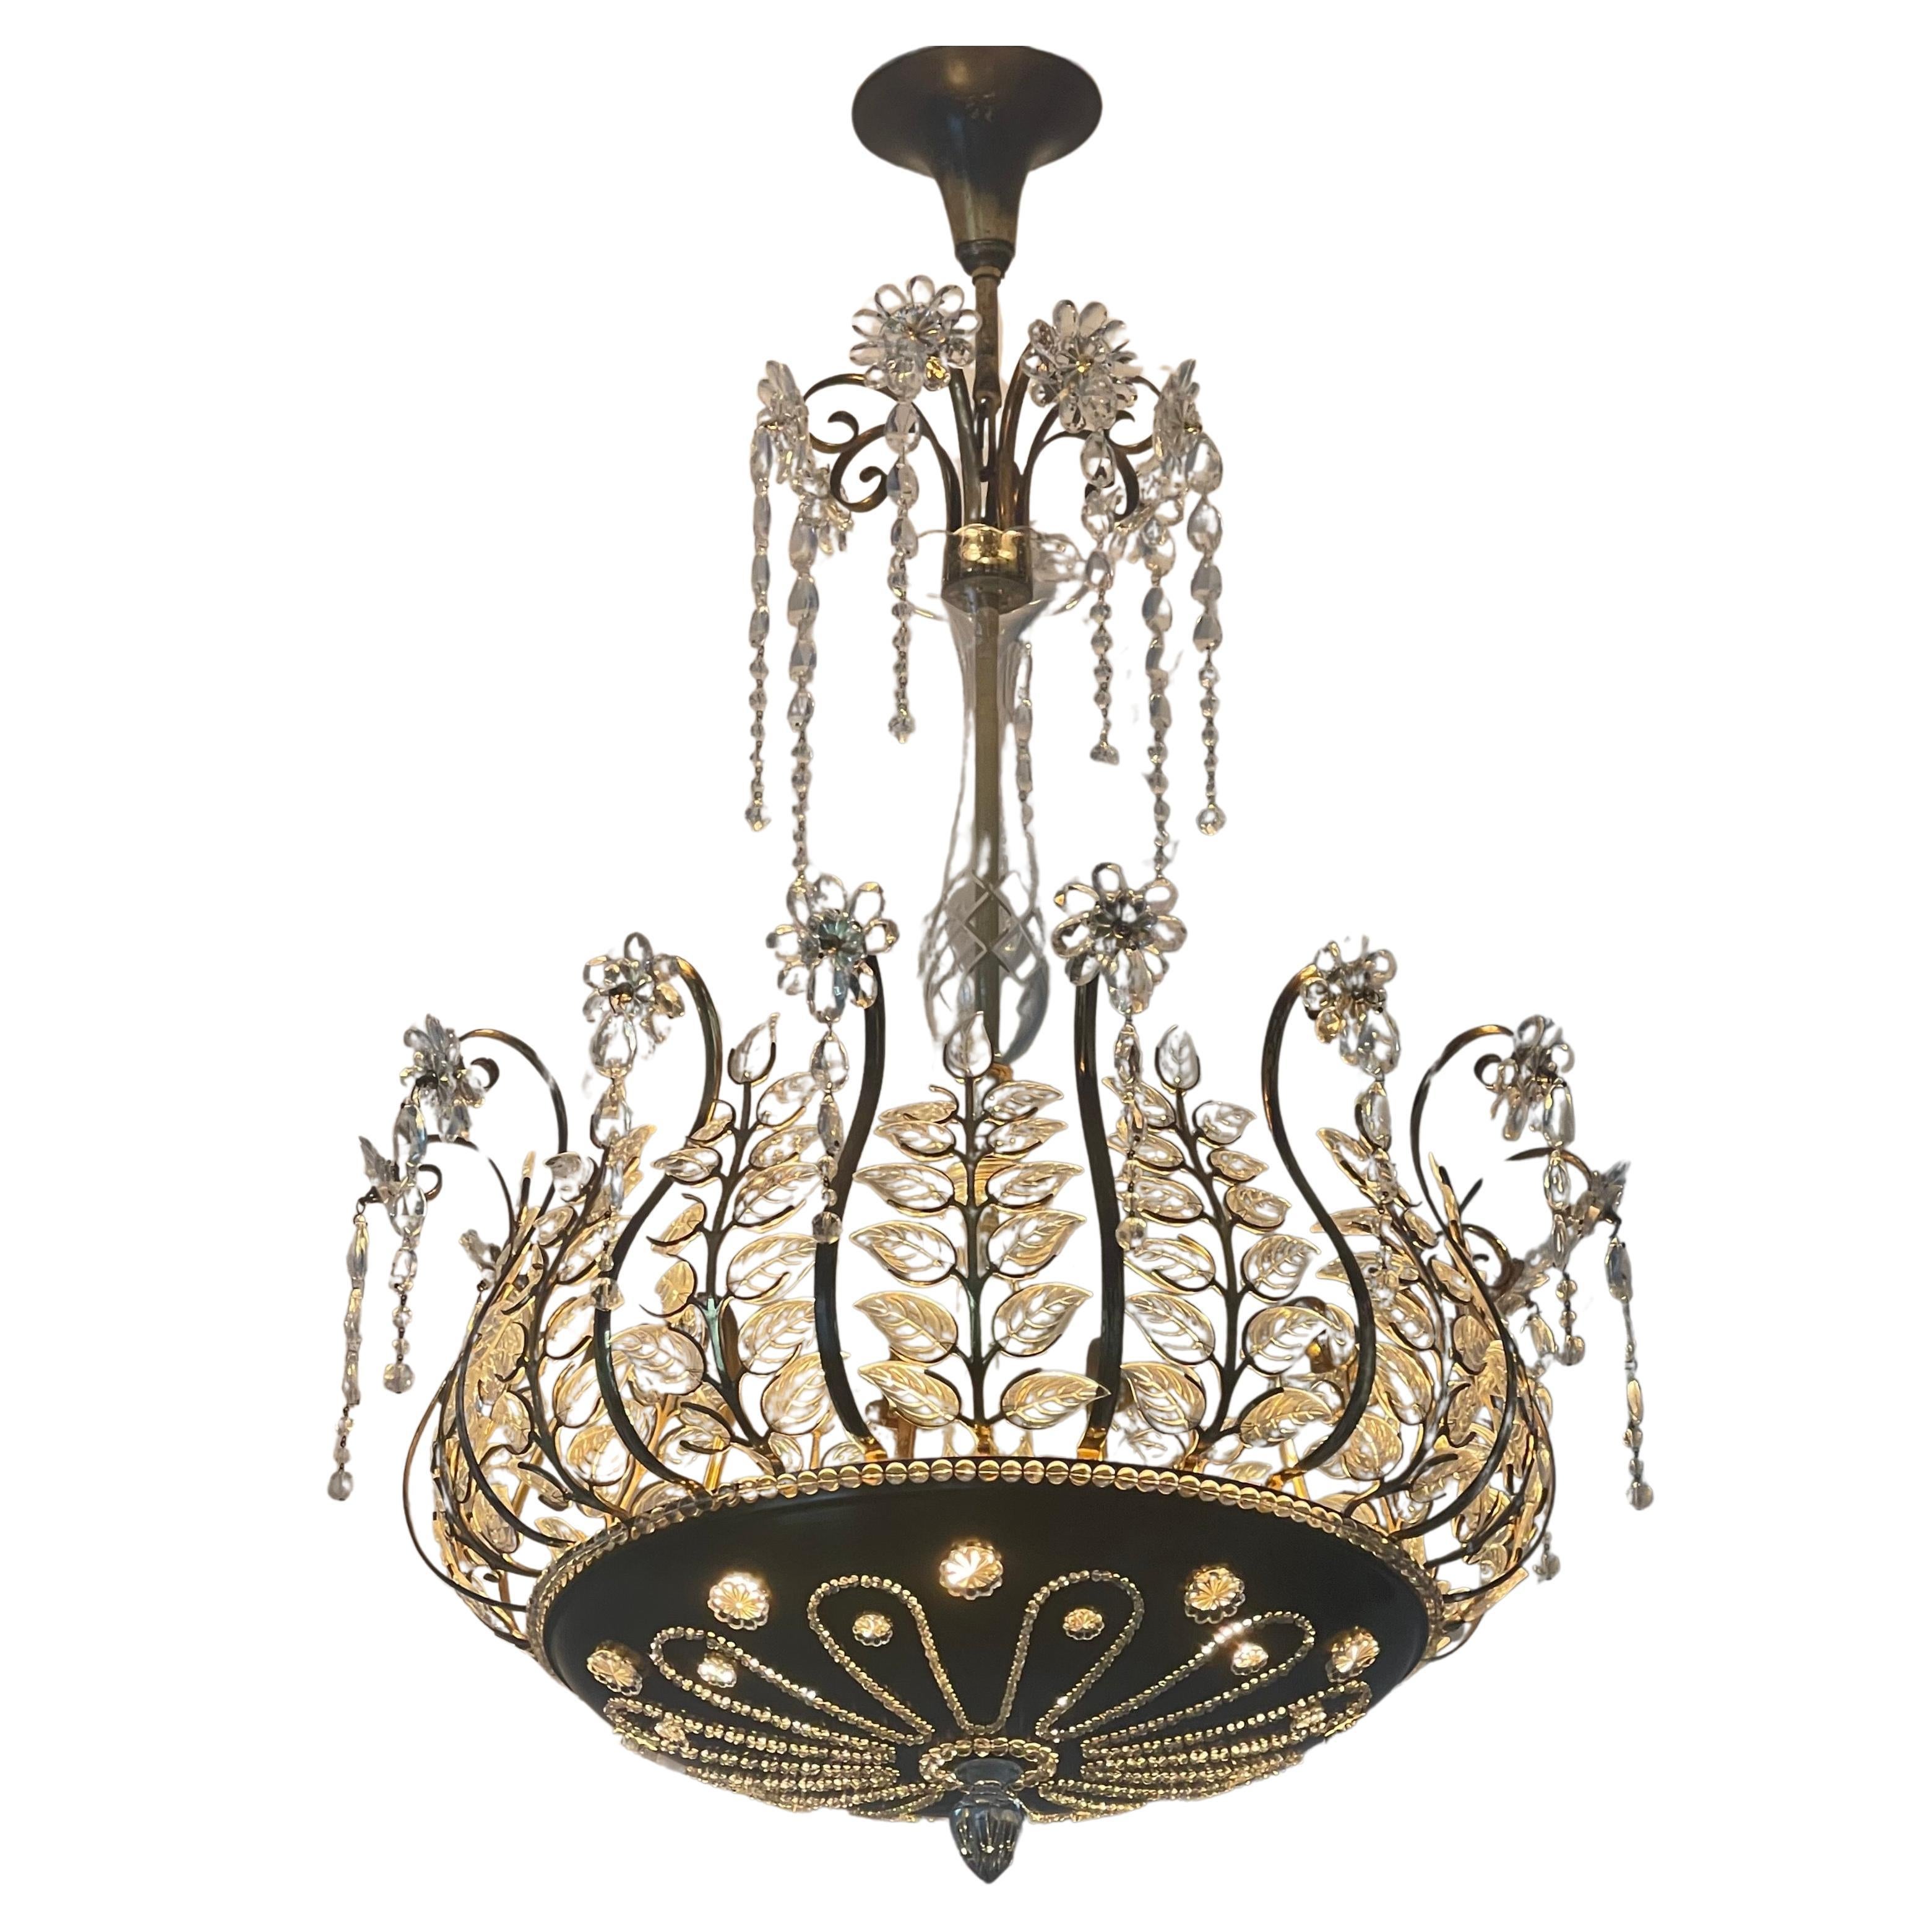 An amazing and very  rare six-light clear glass and crystal flower chandelier in the style of Maison Baguès, France, circa 1950s.
This beautiful handcrafted fixture is made of patinated brass, crystal, and clear glass.
Socket:  6 x E27 or E26 (US) 